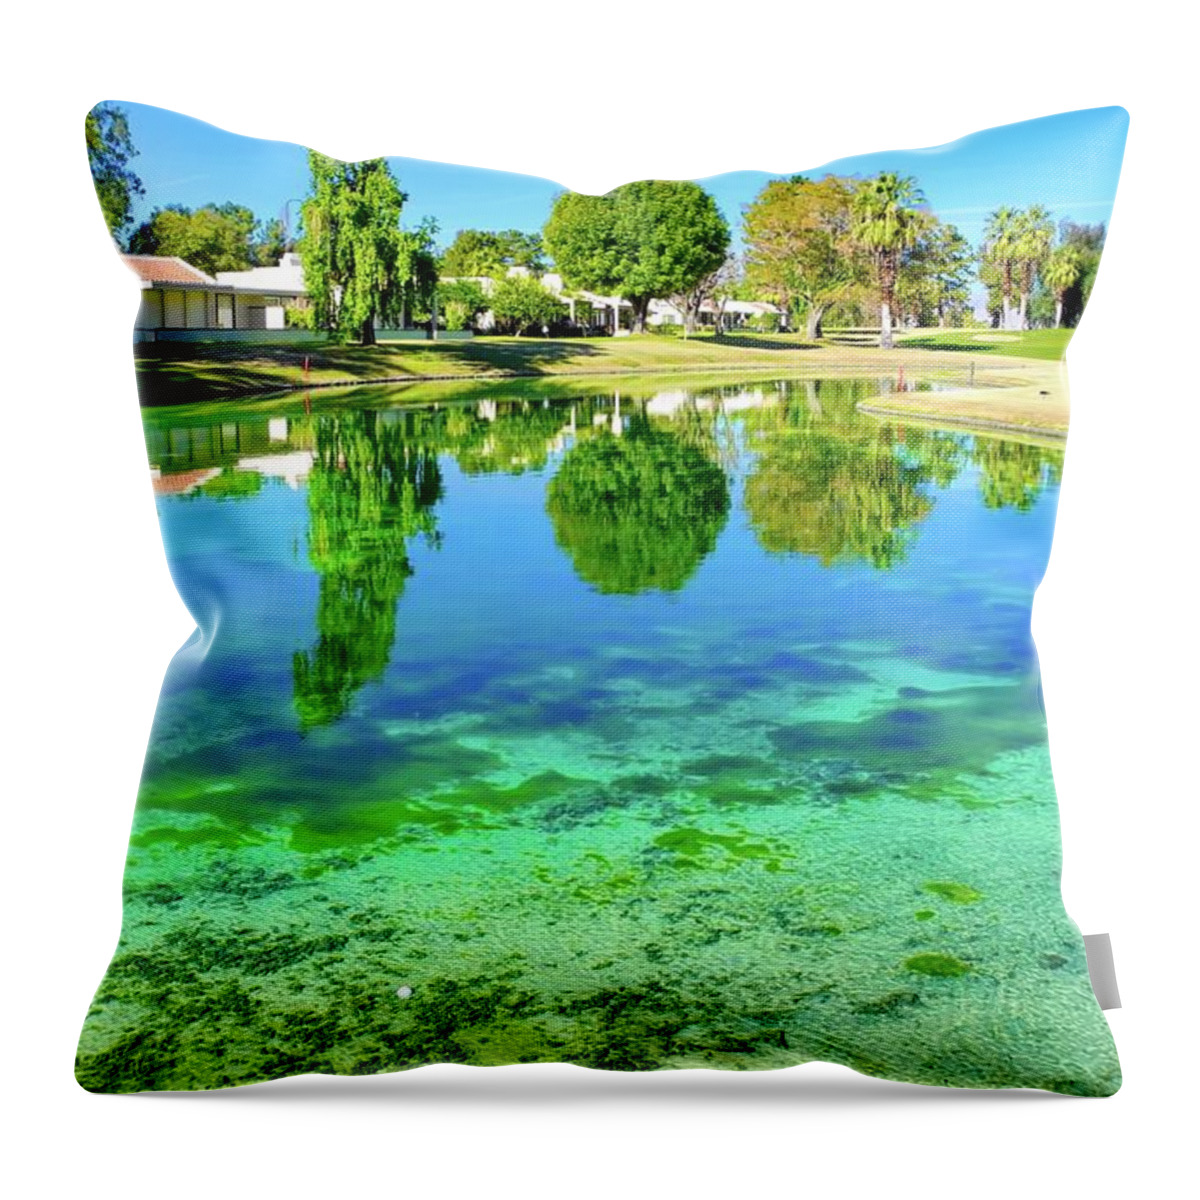 Golf Courses Throw Pillow featuring the photograph Water Hazard by Kirsten Giving